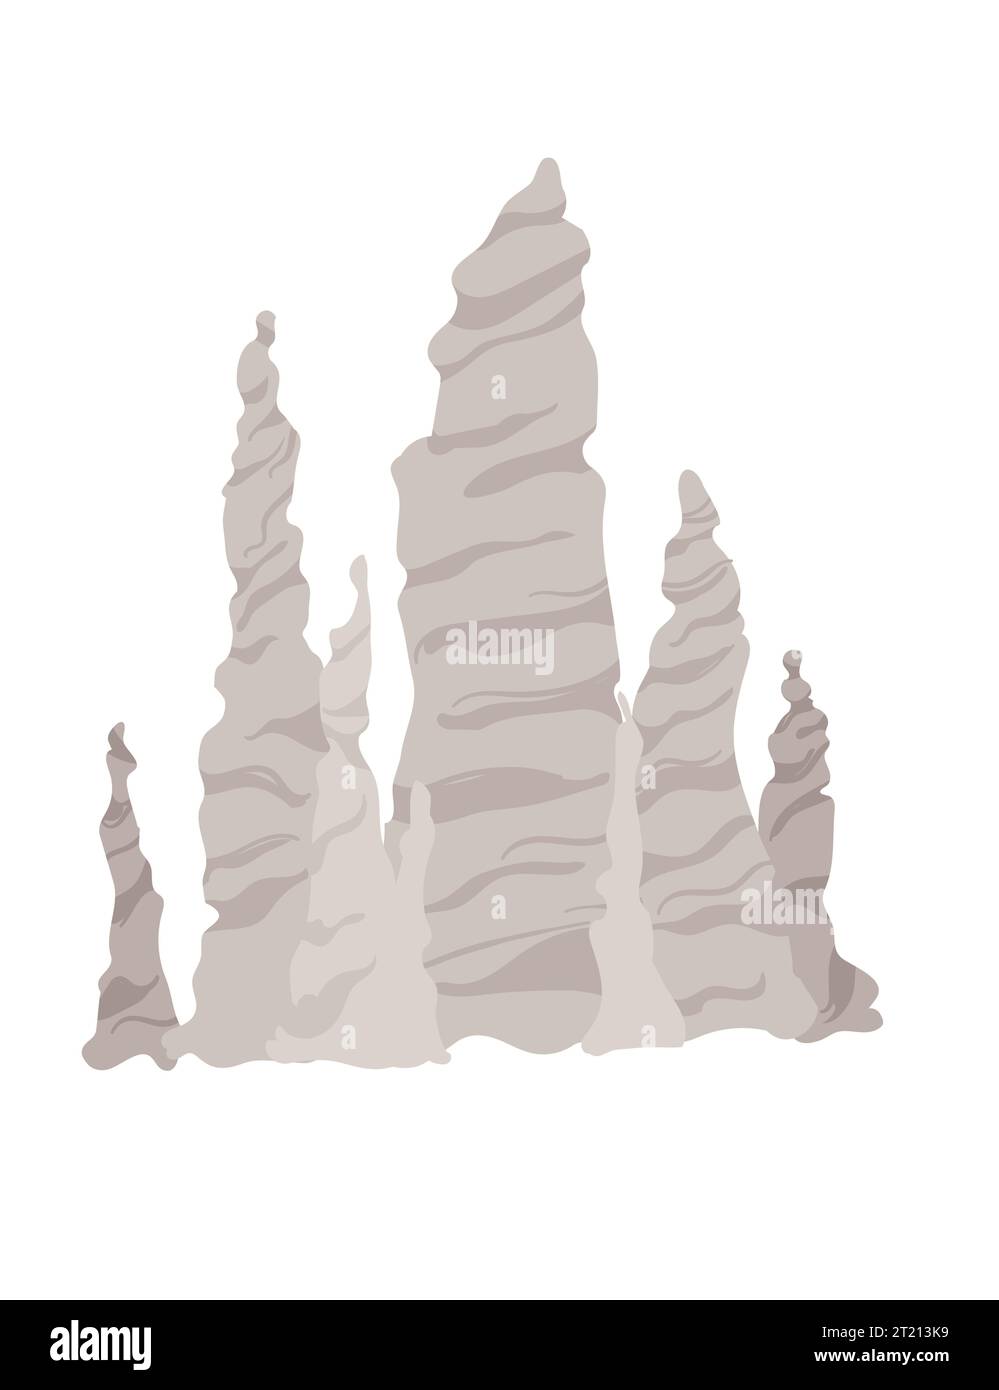 Cave stone mineral stalagmites column natural growth geology formations vector illustration isolated on white background Stock Vector